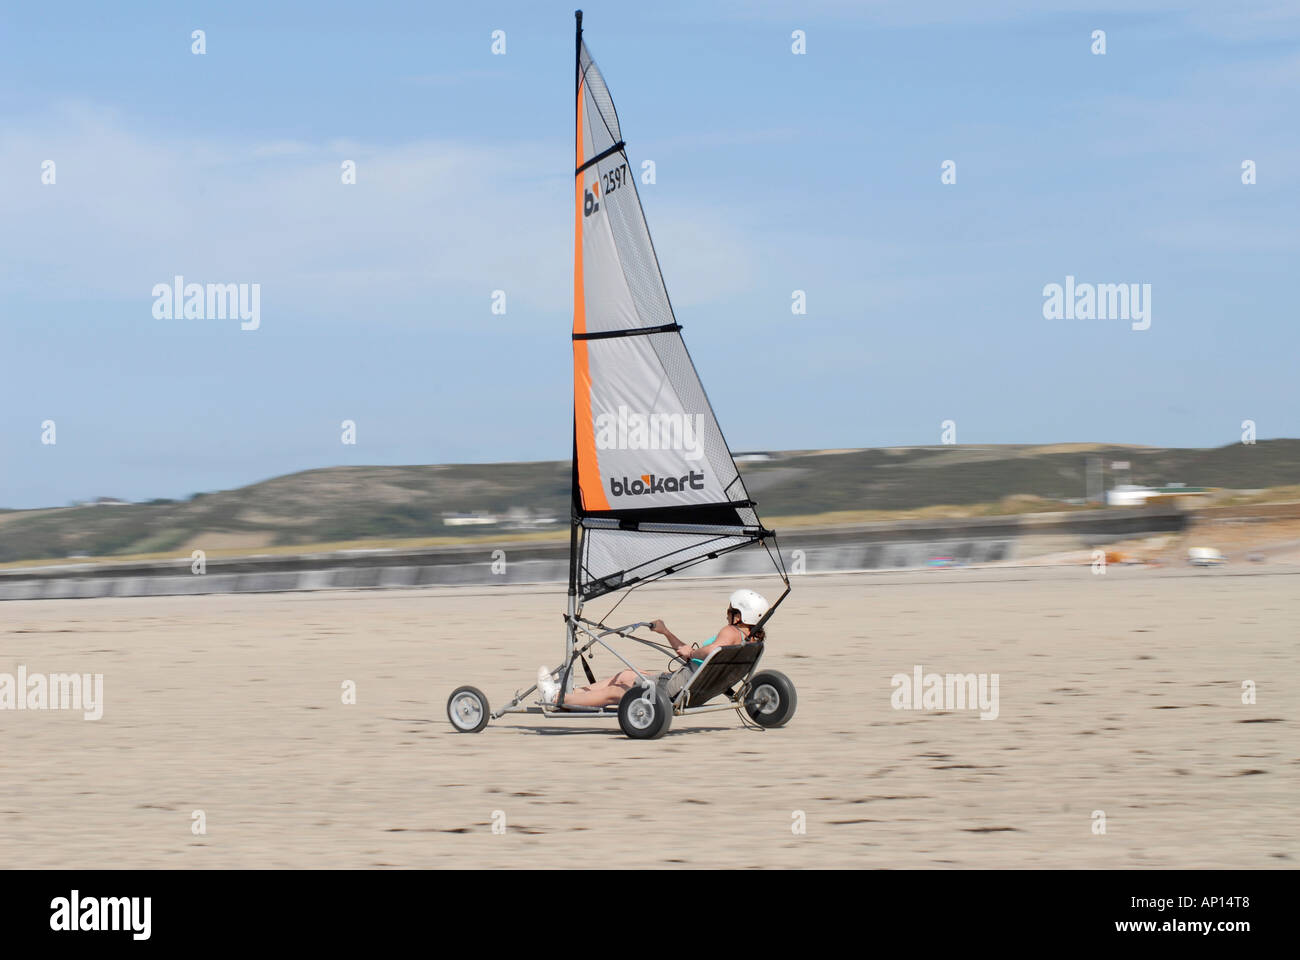 Blokarting on St Ouens beach in Jersey Stock Photo - Alamy